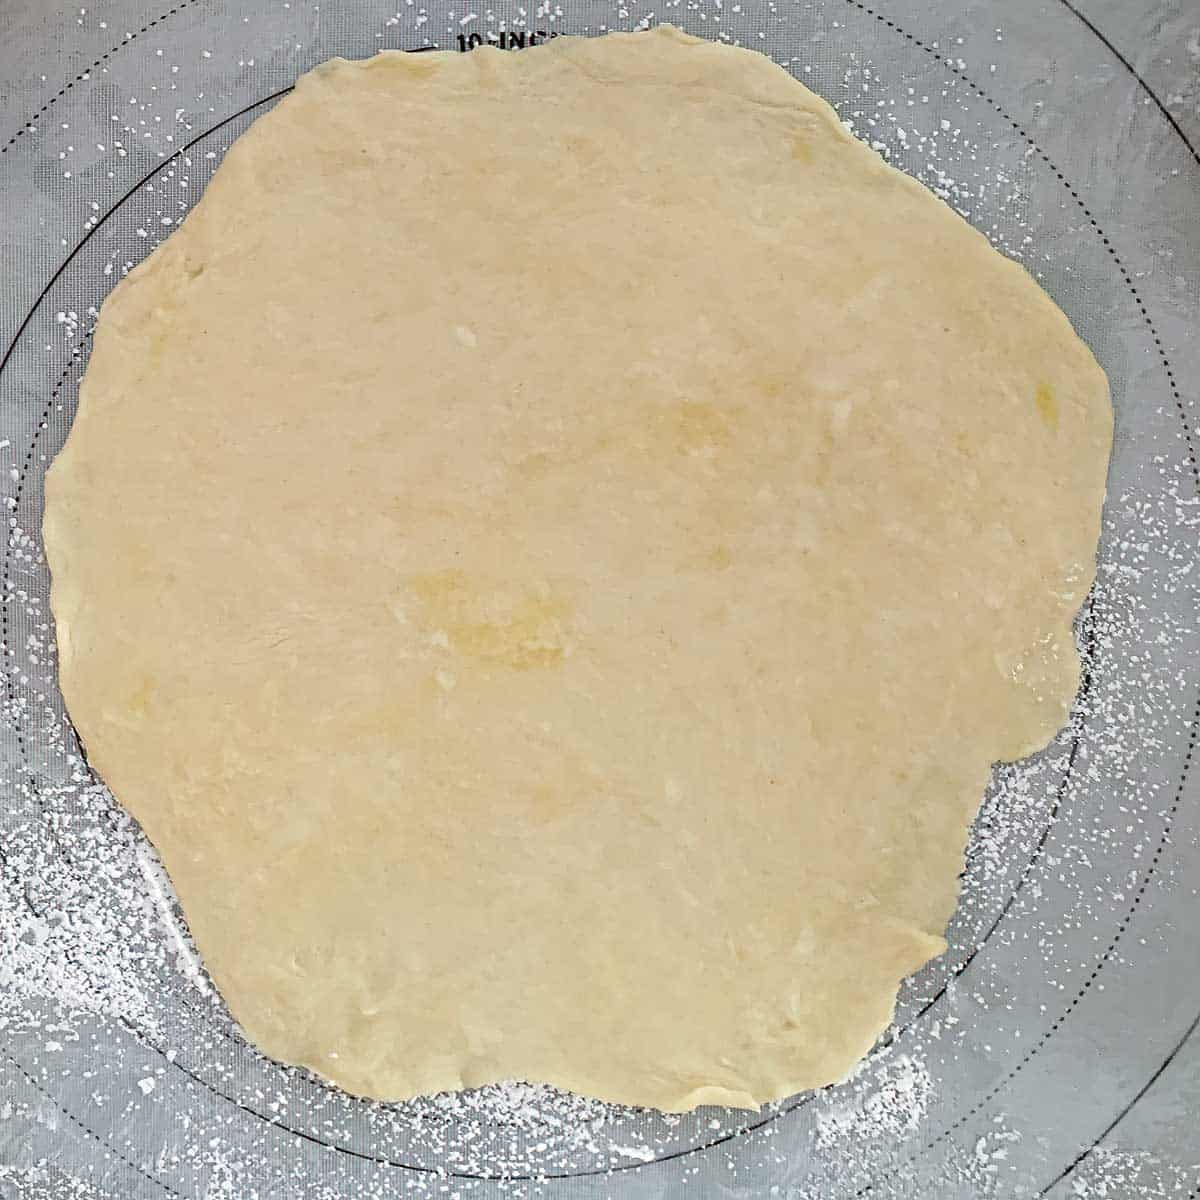 Cookie dough rolled out on pastry mat.